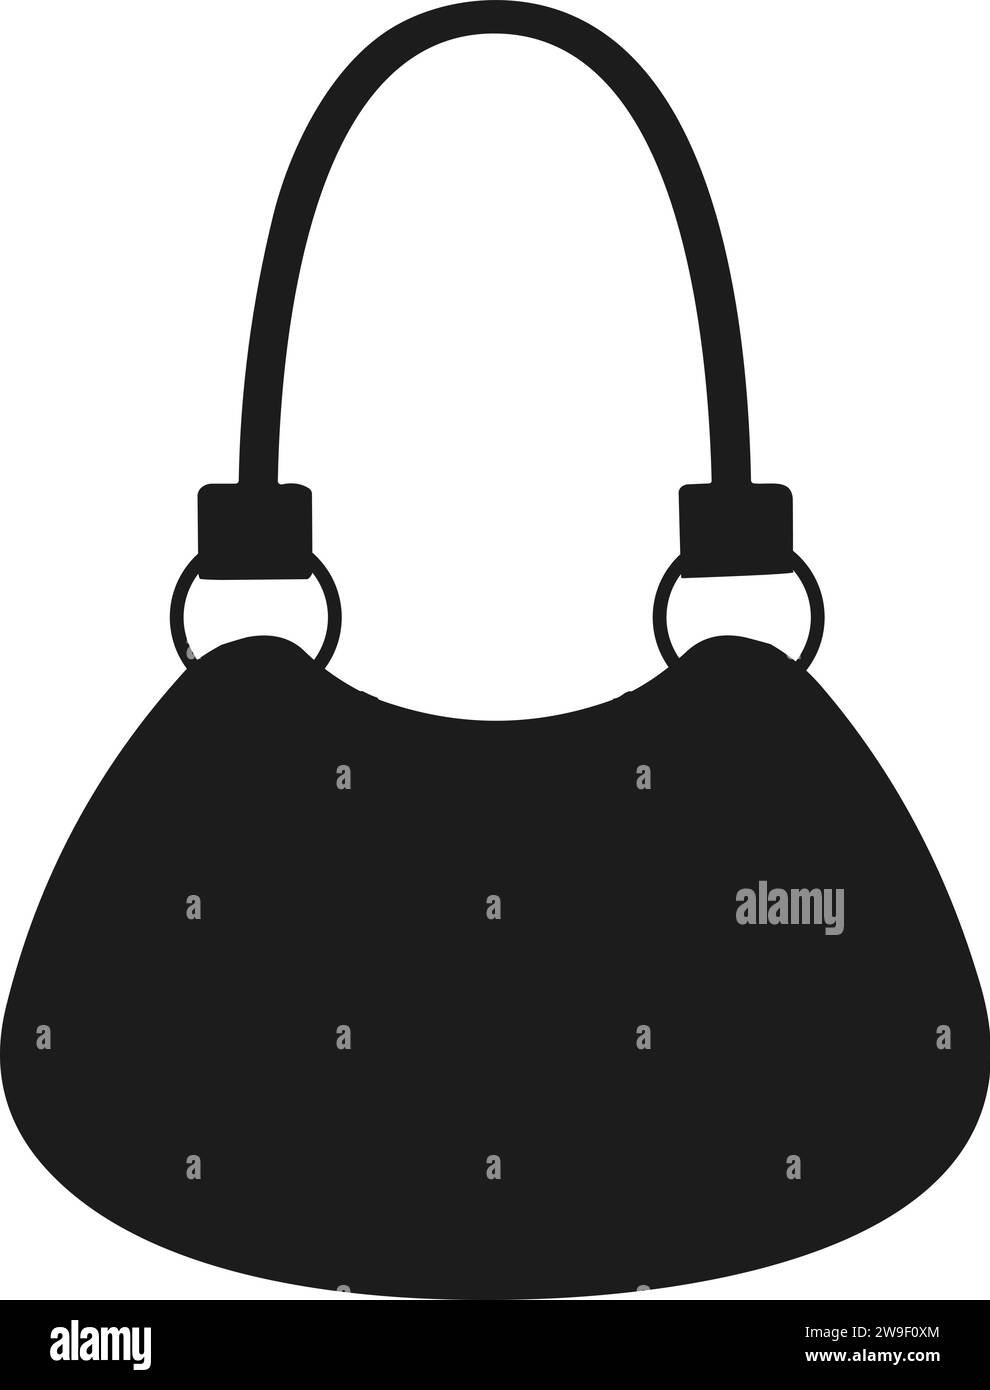 Purse Silhouette Stock Vector Illustration and Royalty Free Purse  Silhouette Clipart